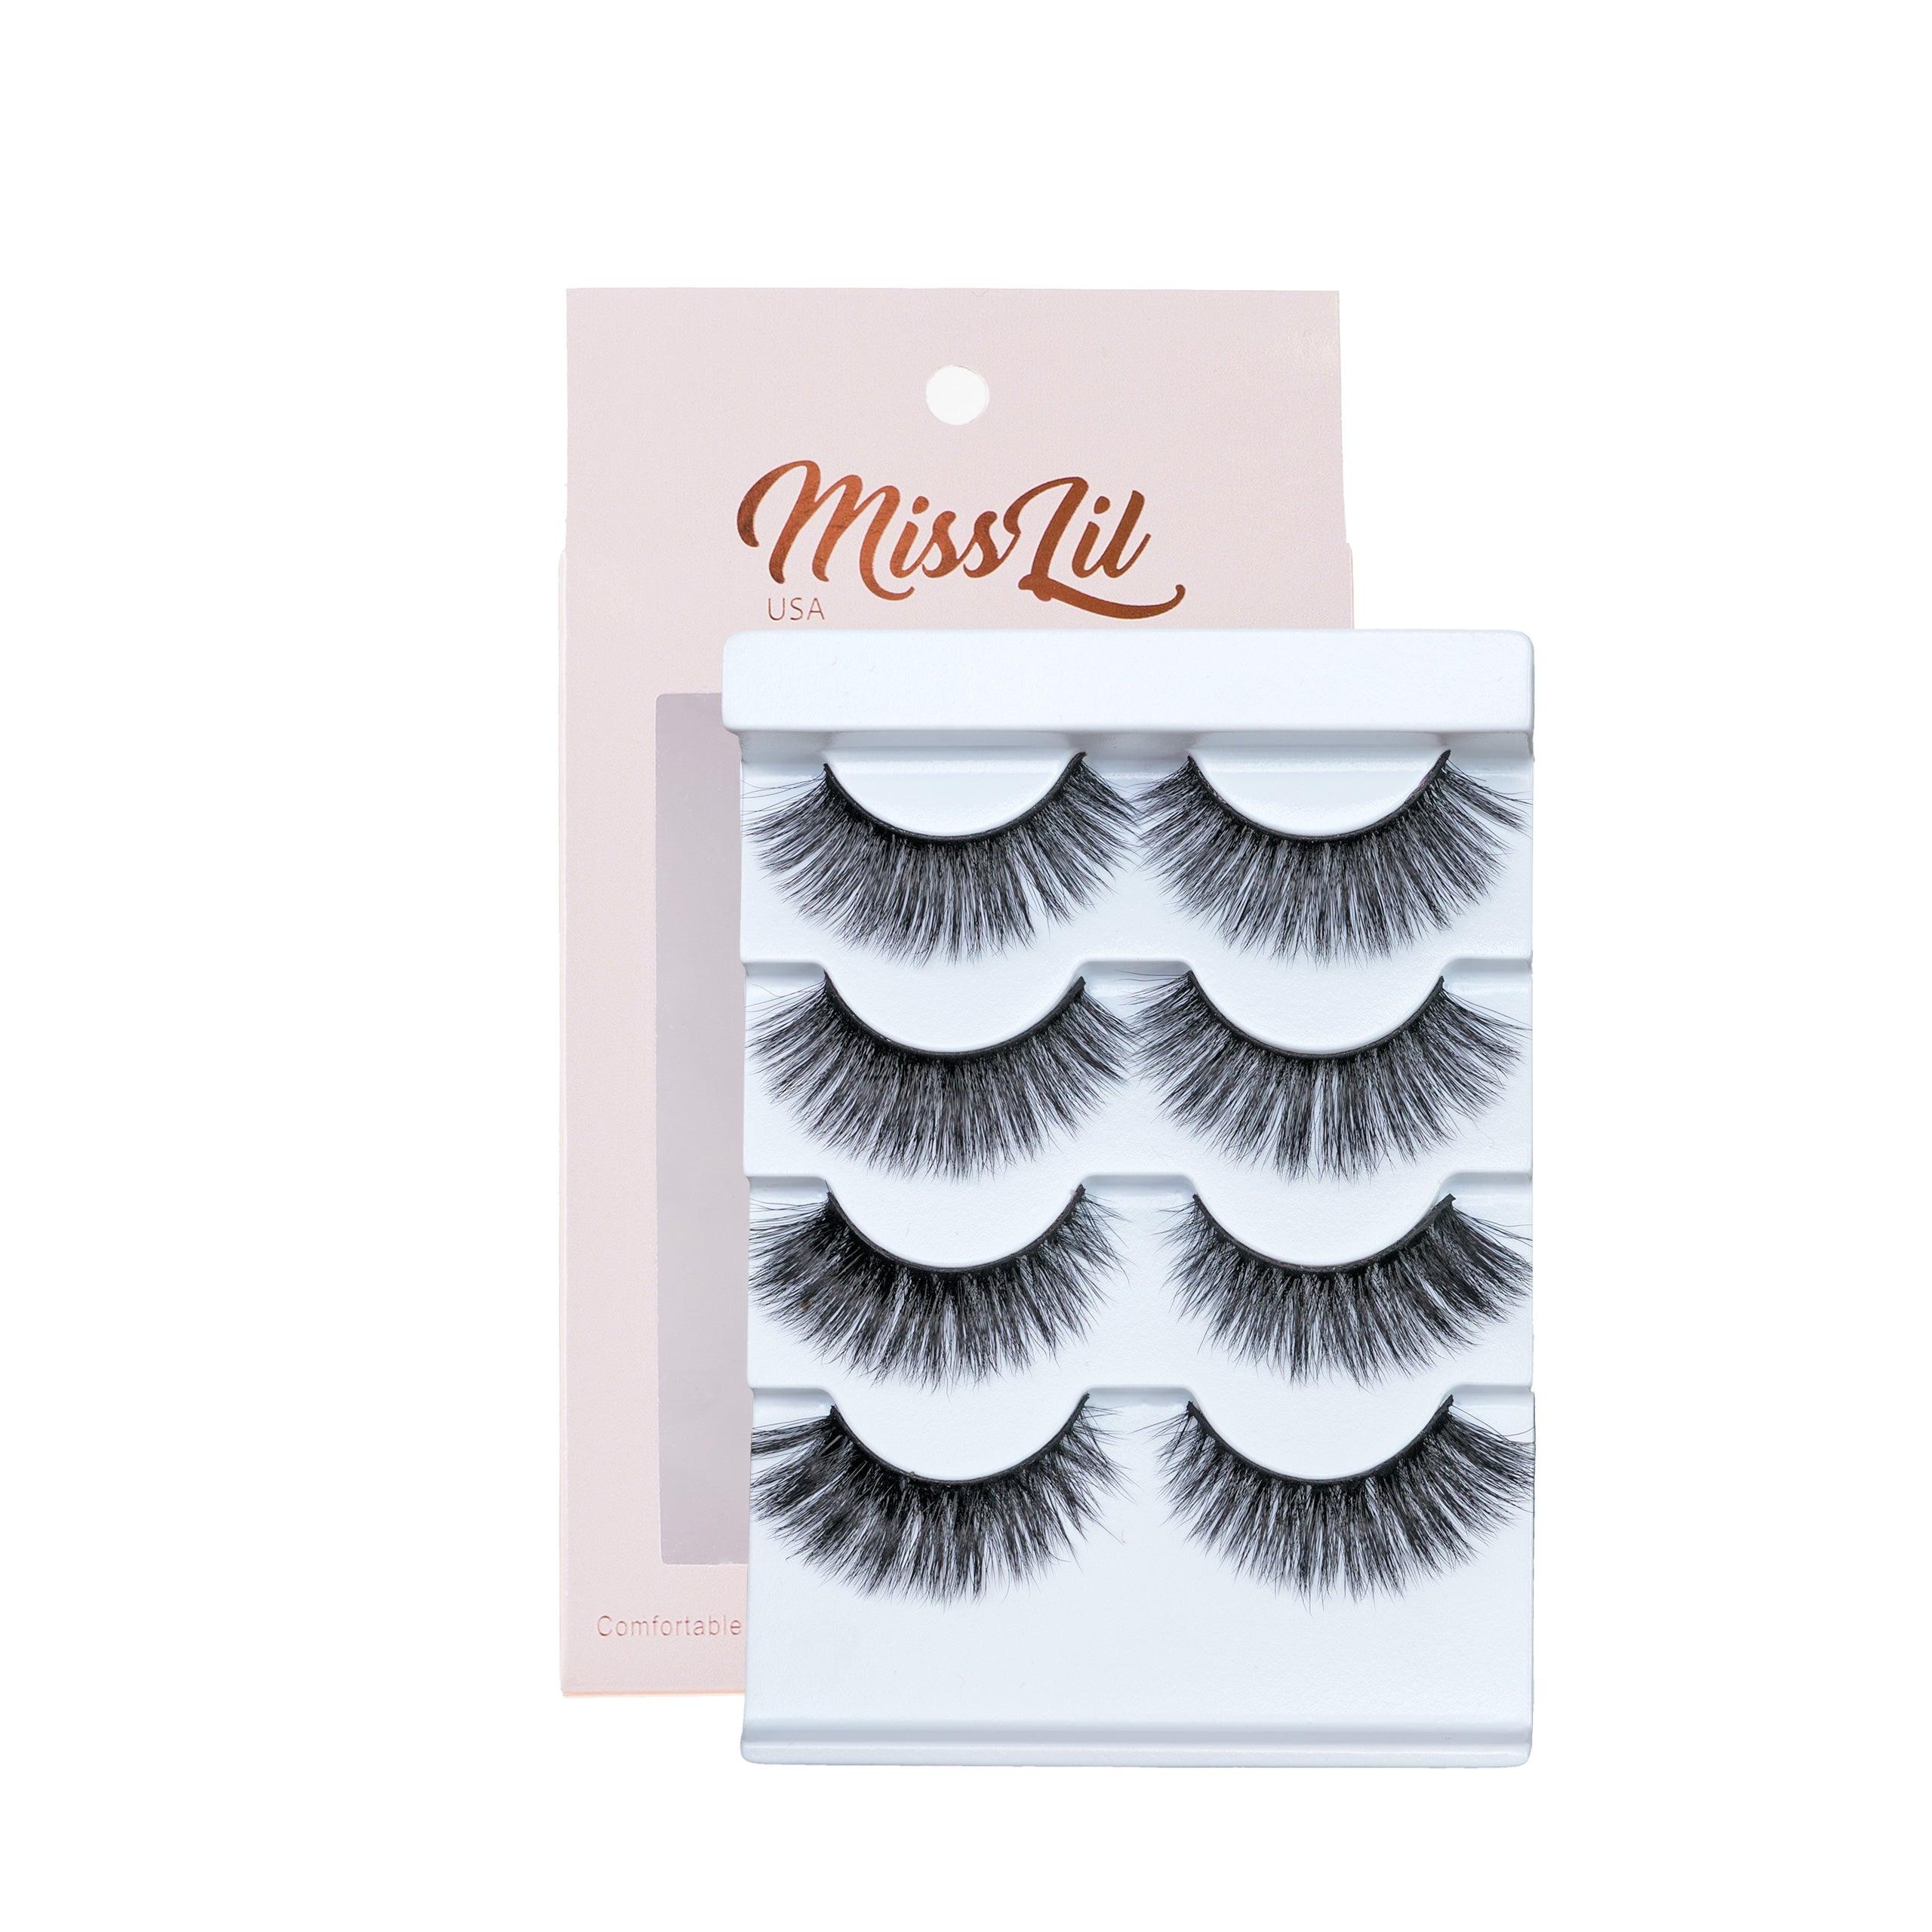 4 Pairs Lashes - Classic Collection #3 - Miss Lil USA